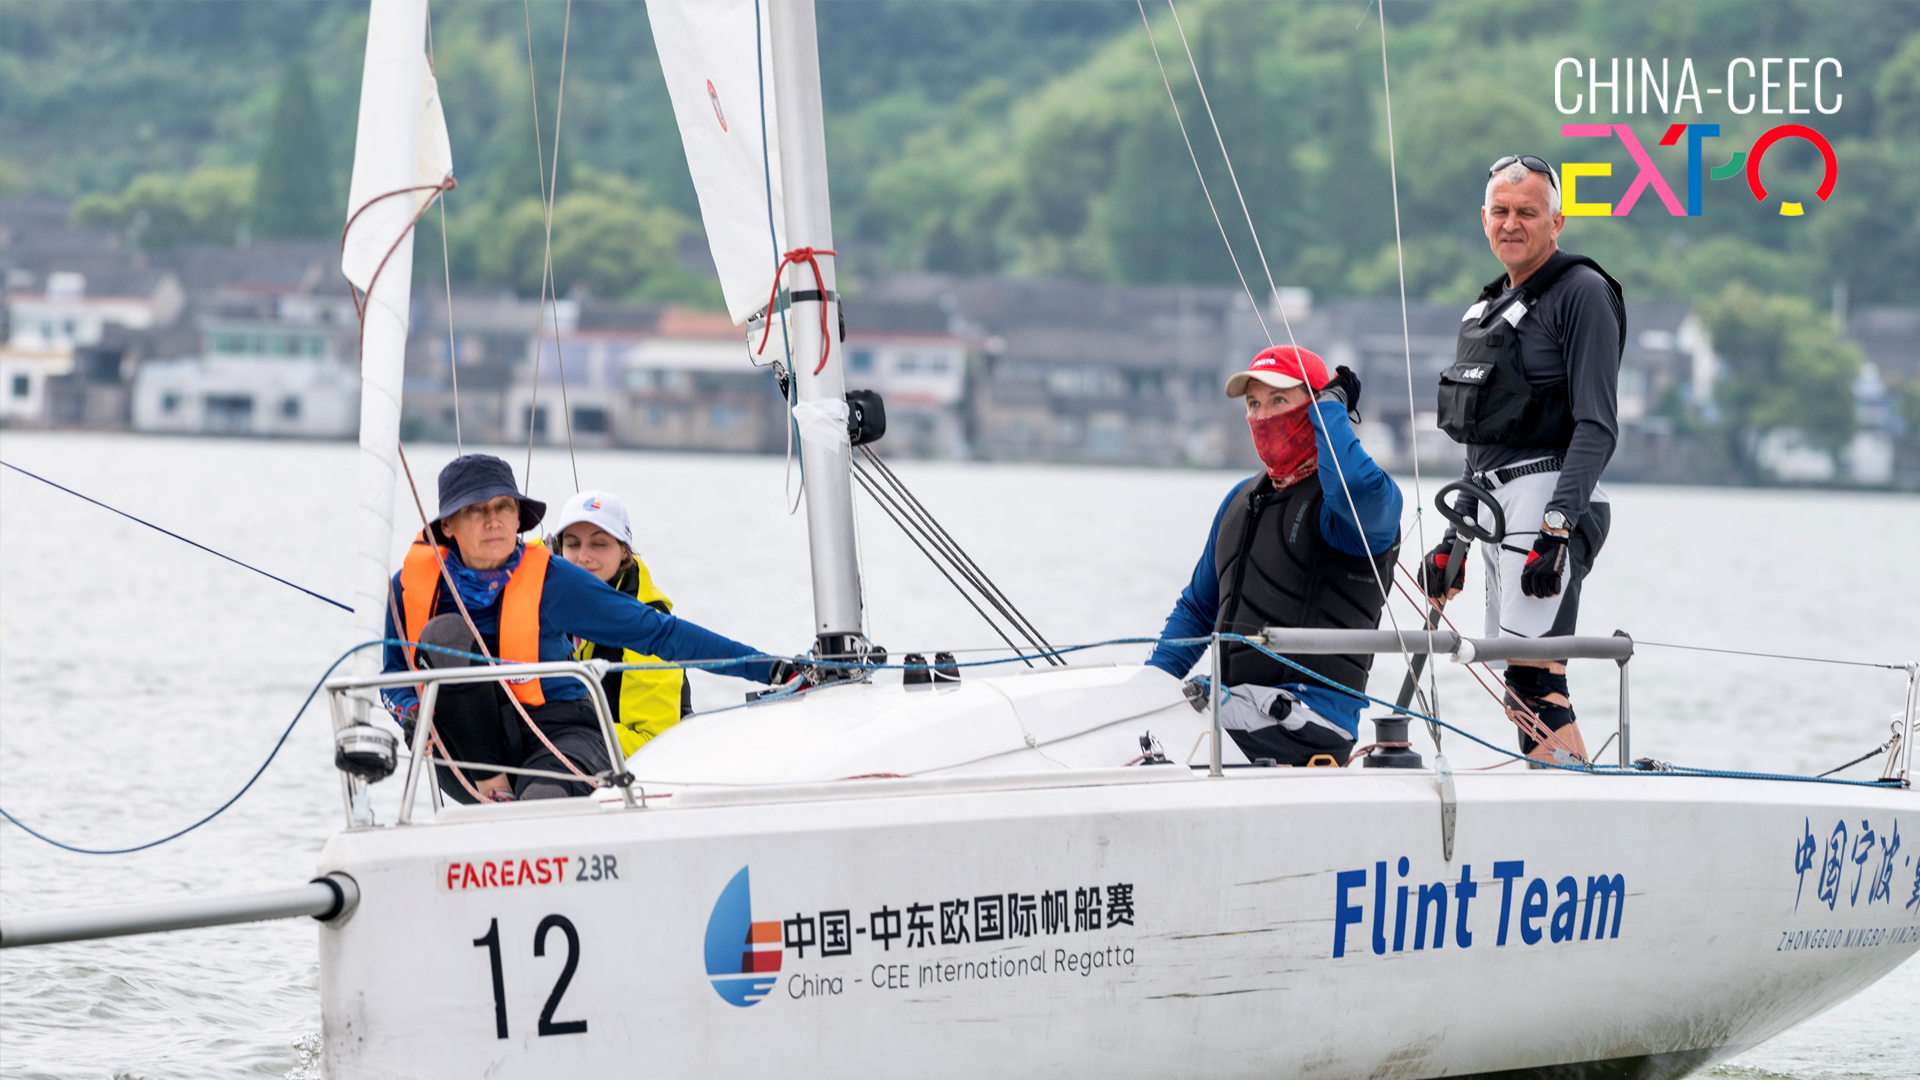 In pictures: The first China-Central and Eastern Europe International Regatta kicks off